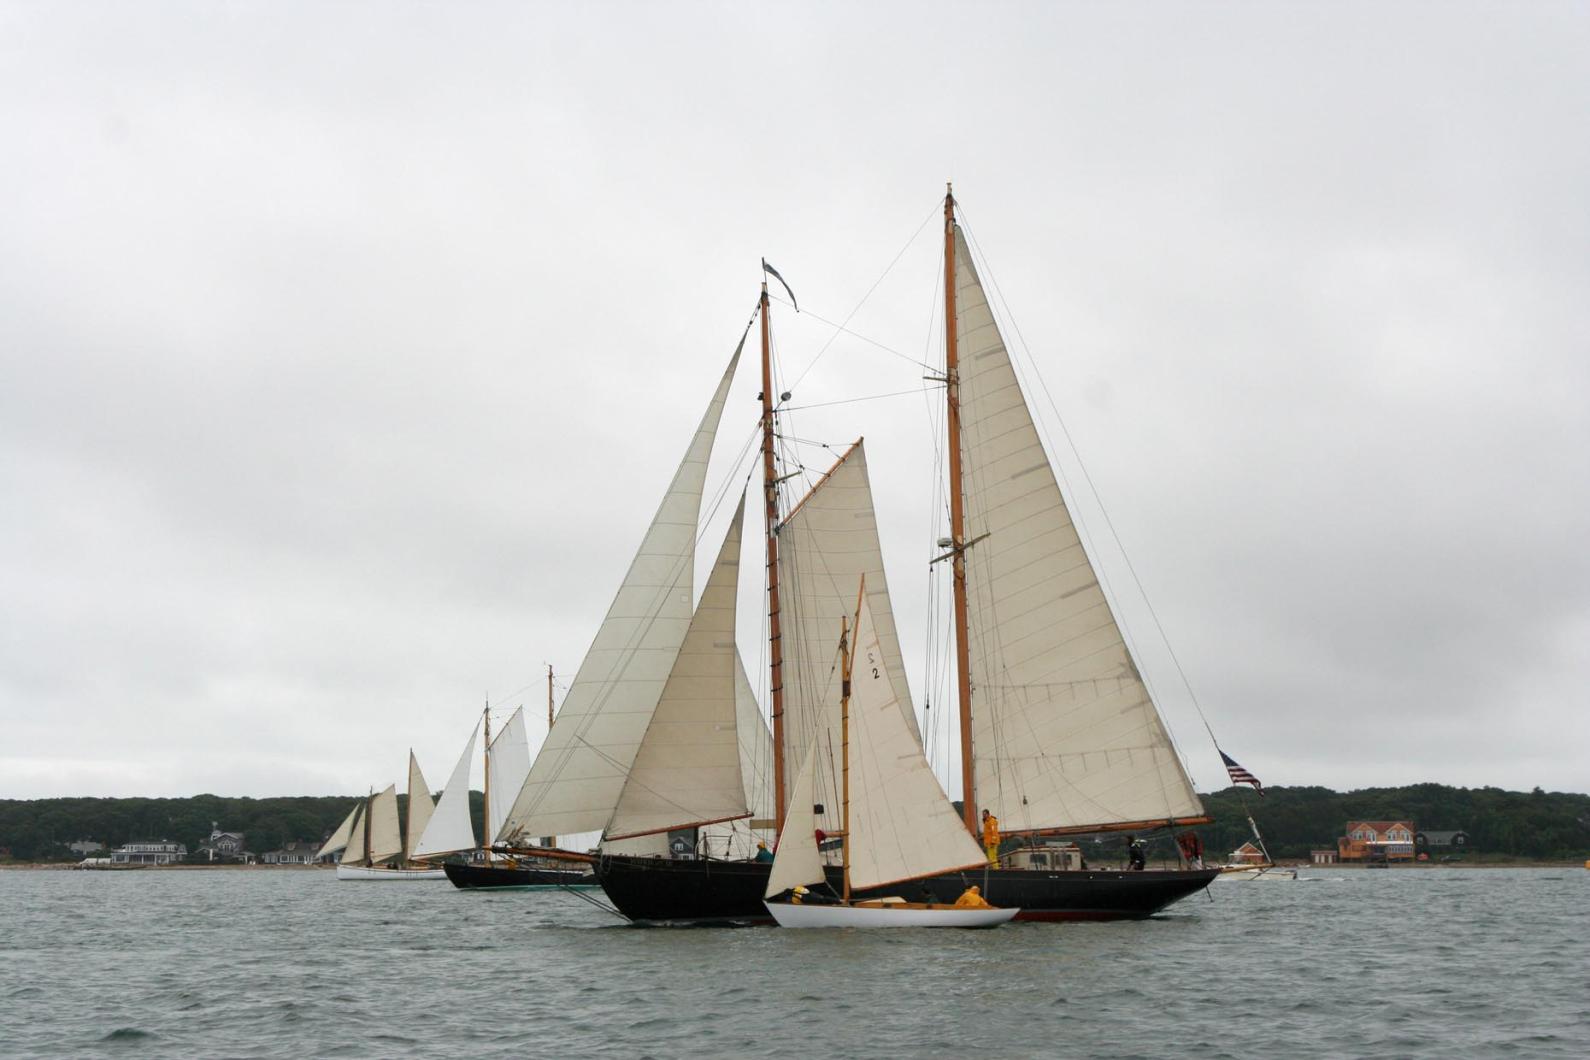 sailboats in the race